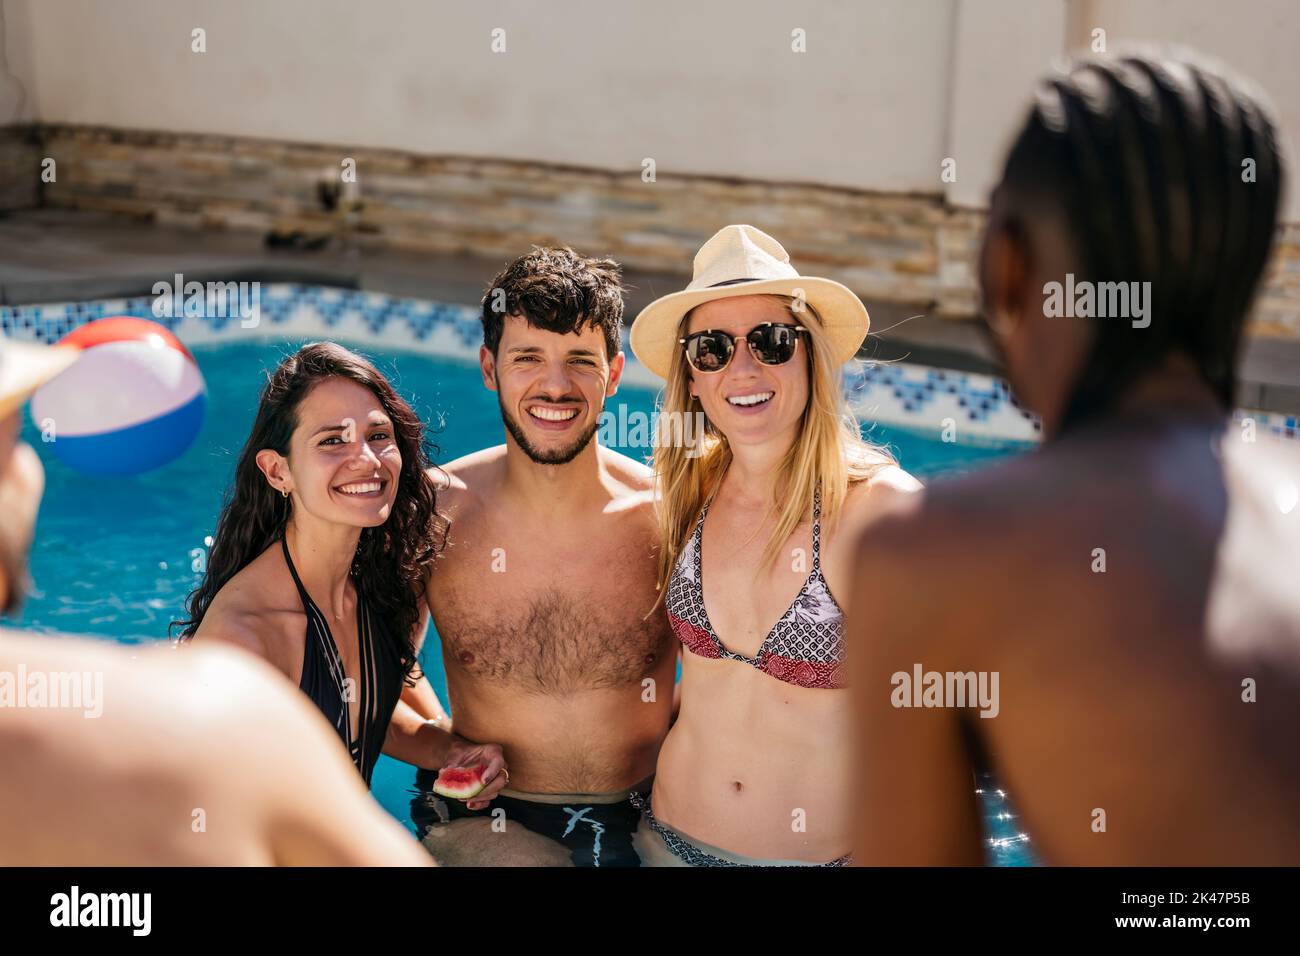 portrait of young latin man with 2 women inside a swimming pool Stock Photo